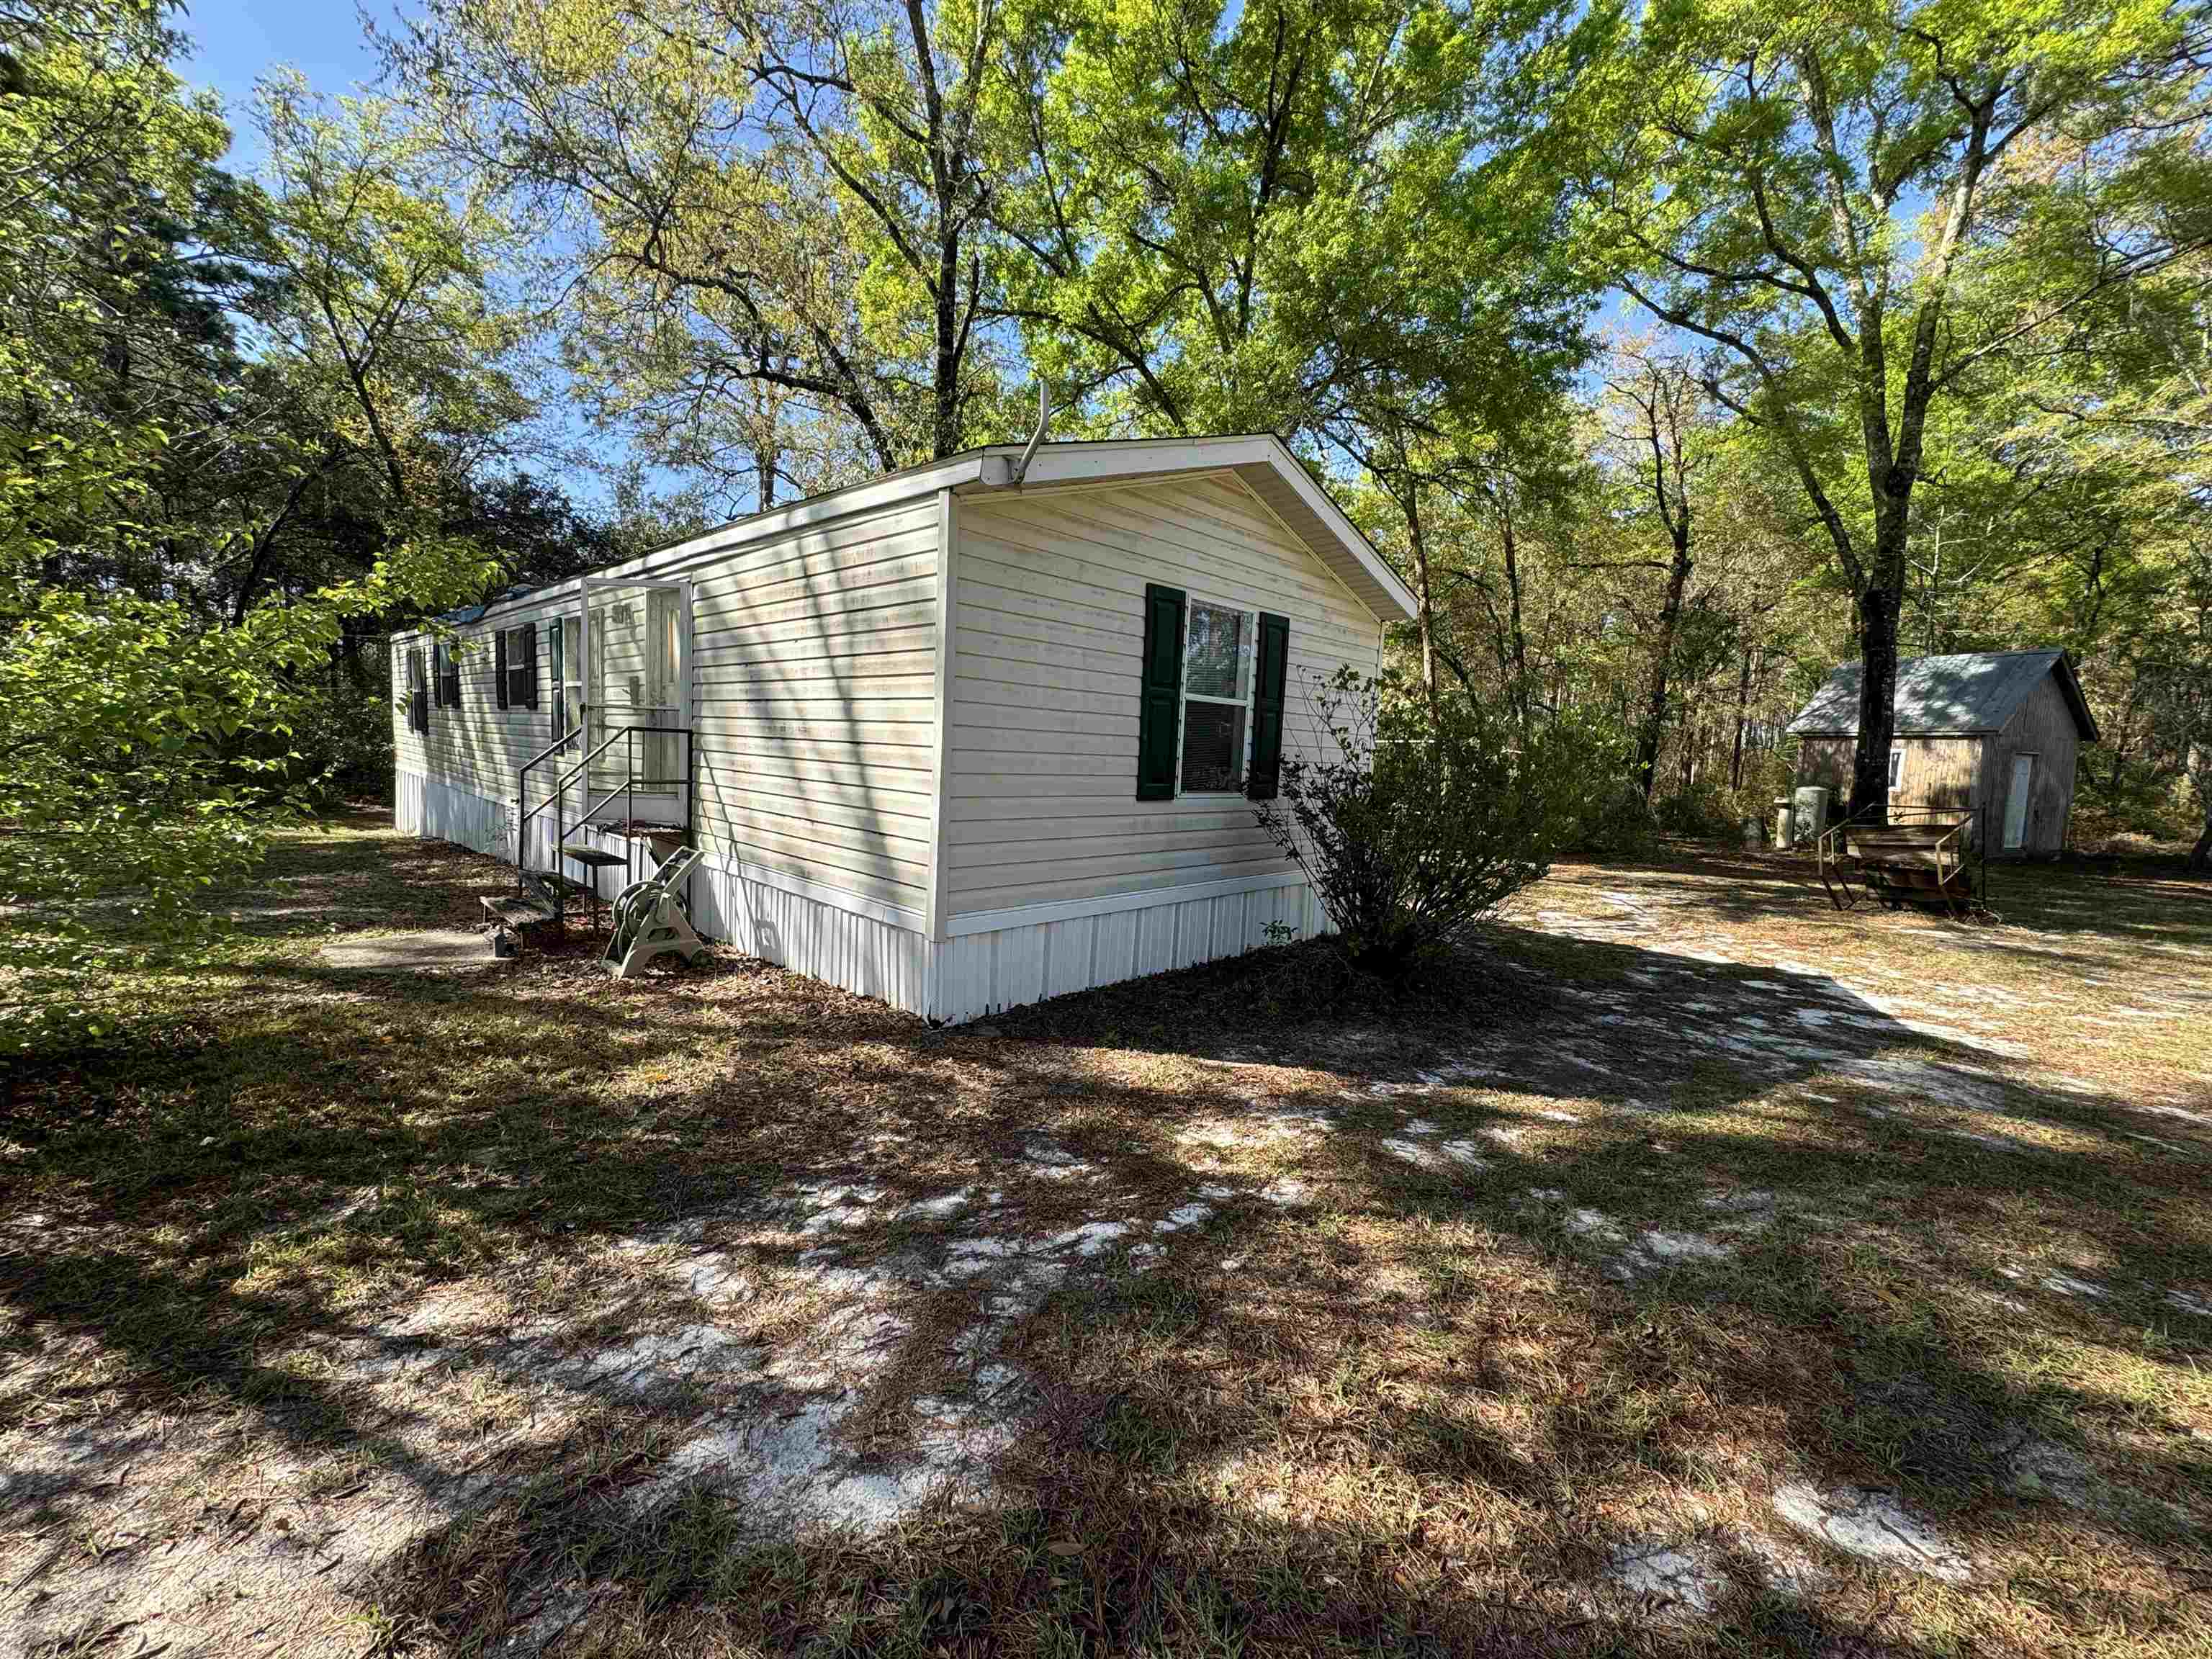 9498 Courtney Lane,TALLAHASSEE,Florida 32305,2 Bedrooms Bedrooms,1 BathroomBathrooms,Manuf/mobile home,9498 Courtney Lane,370248